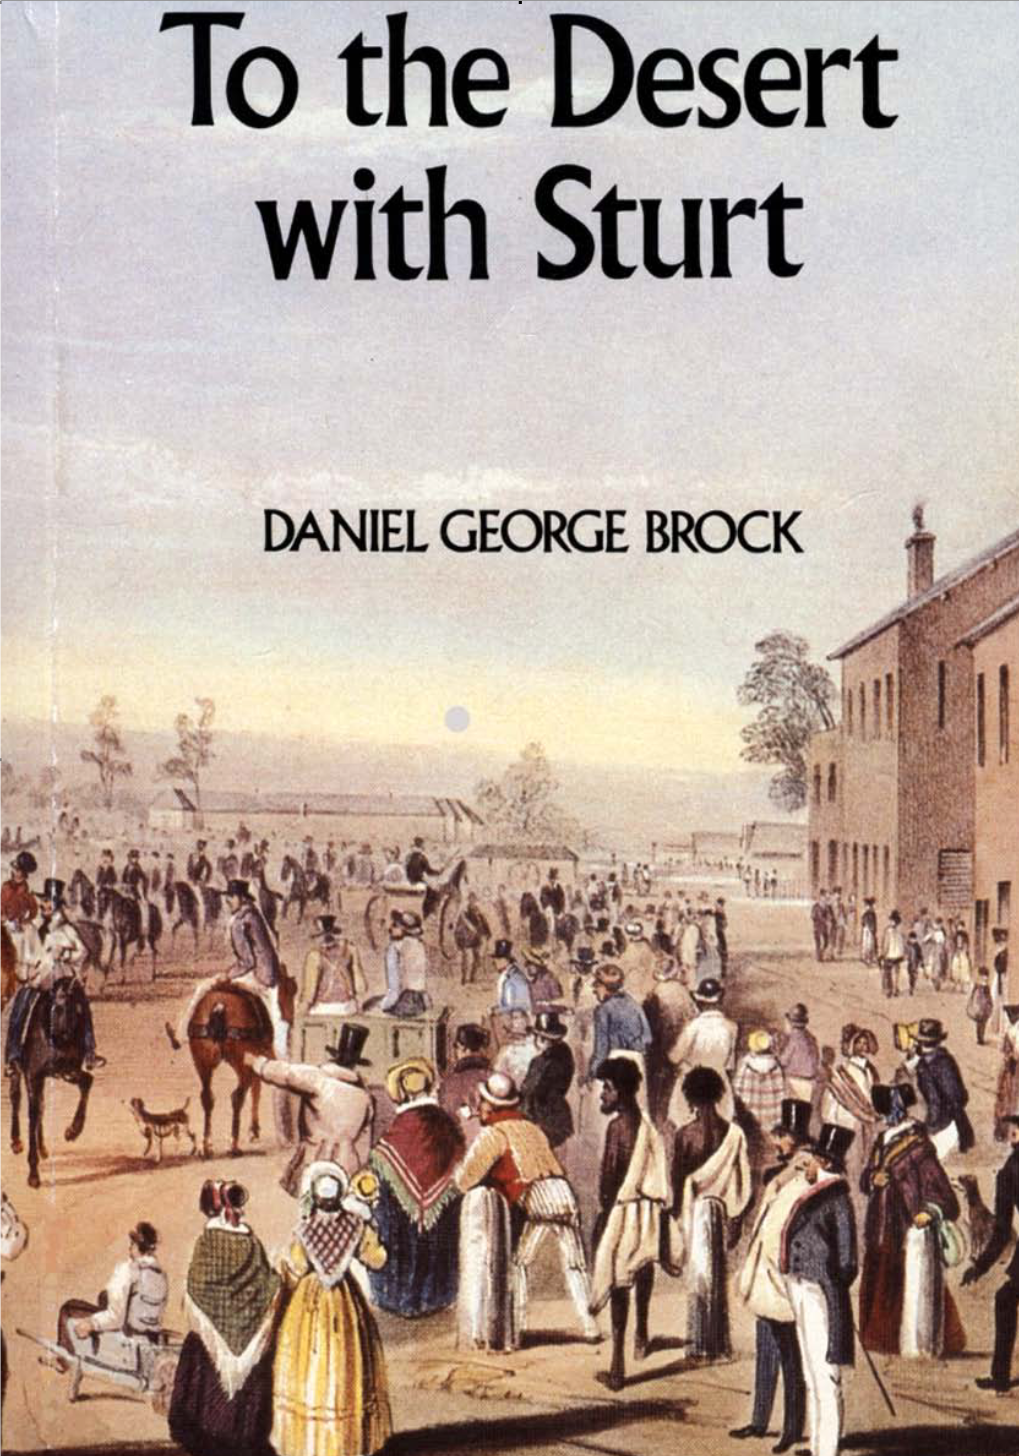 To the Desert with Sturt by Daniel George Brock